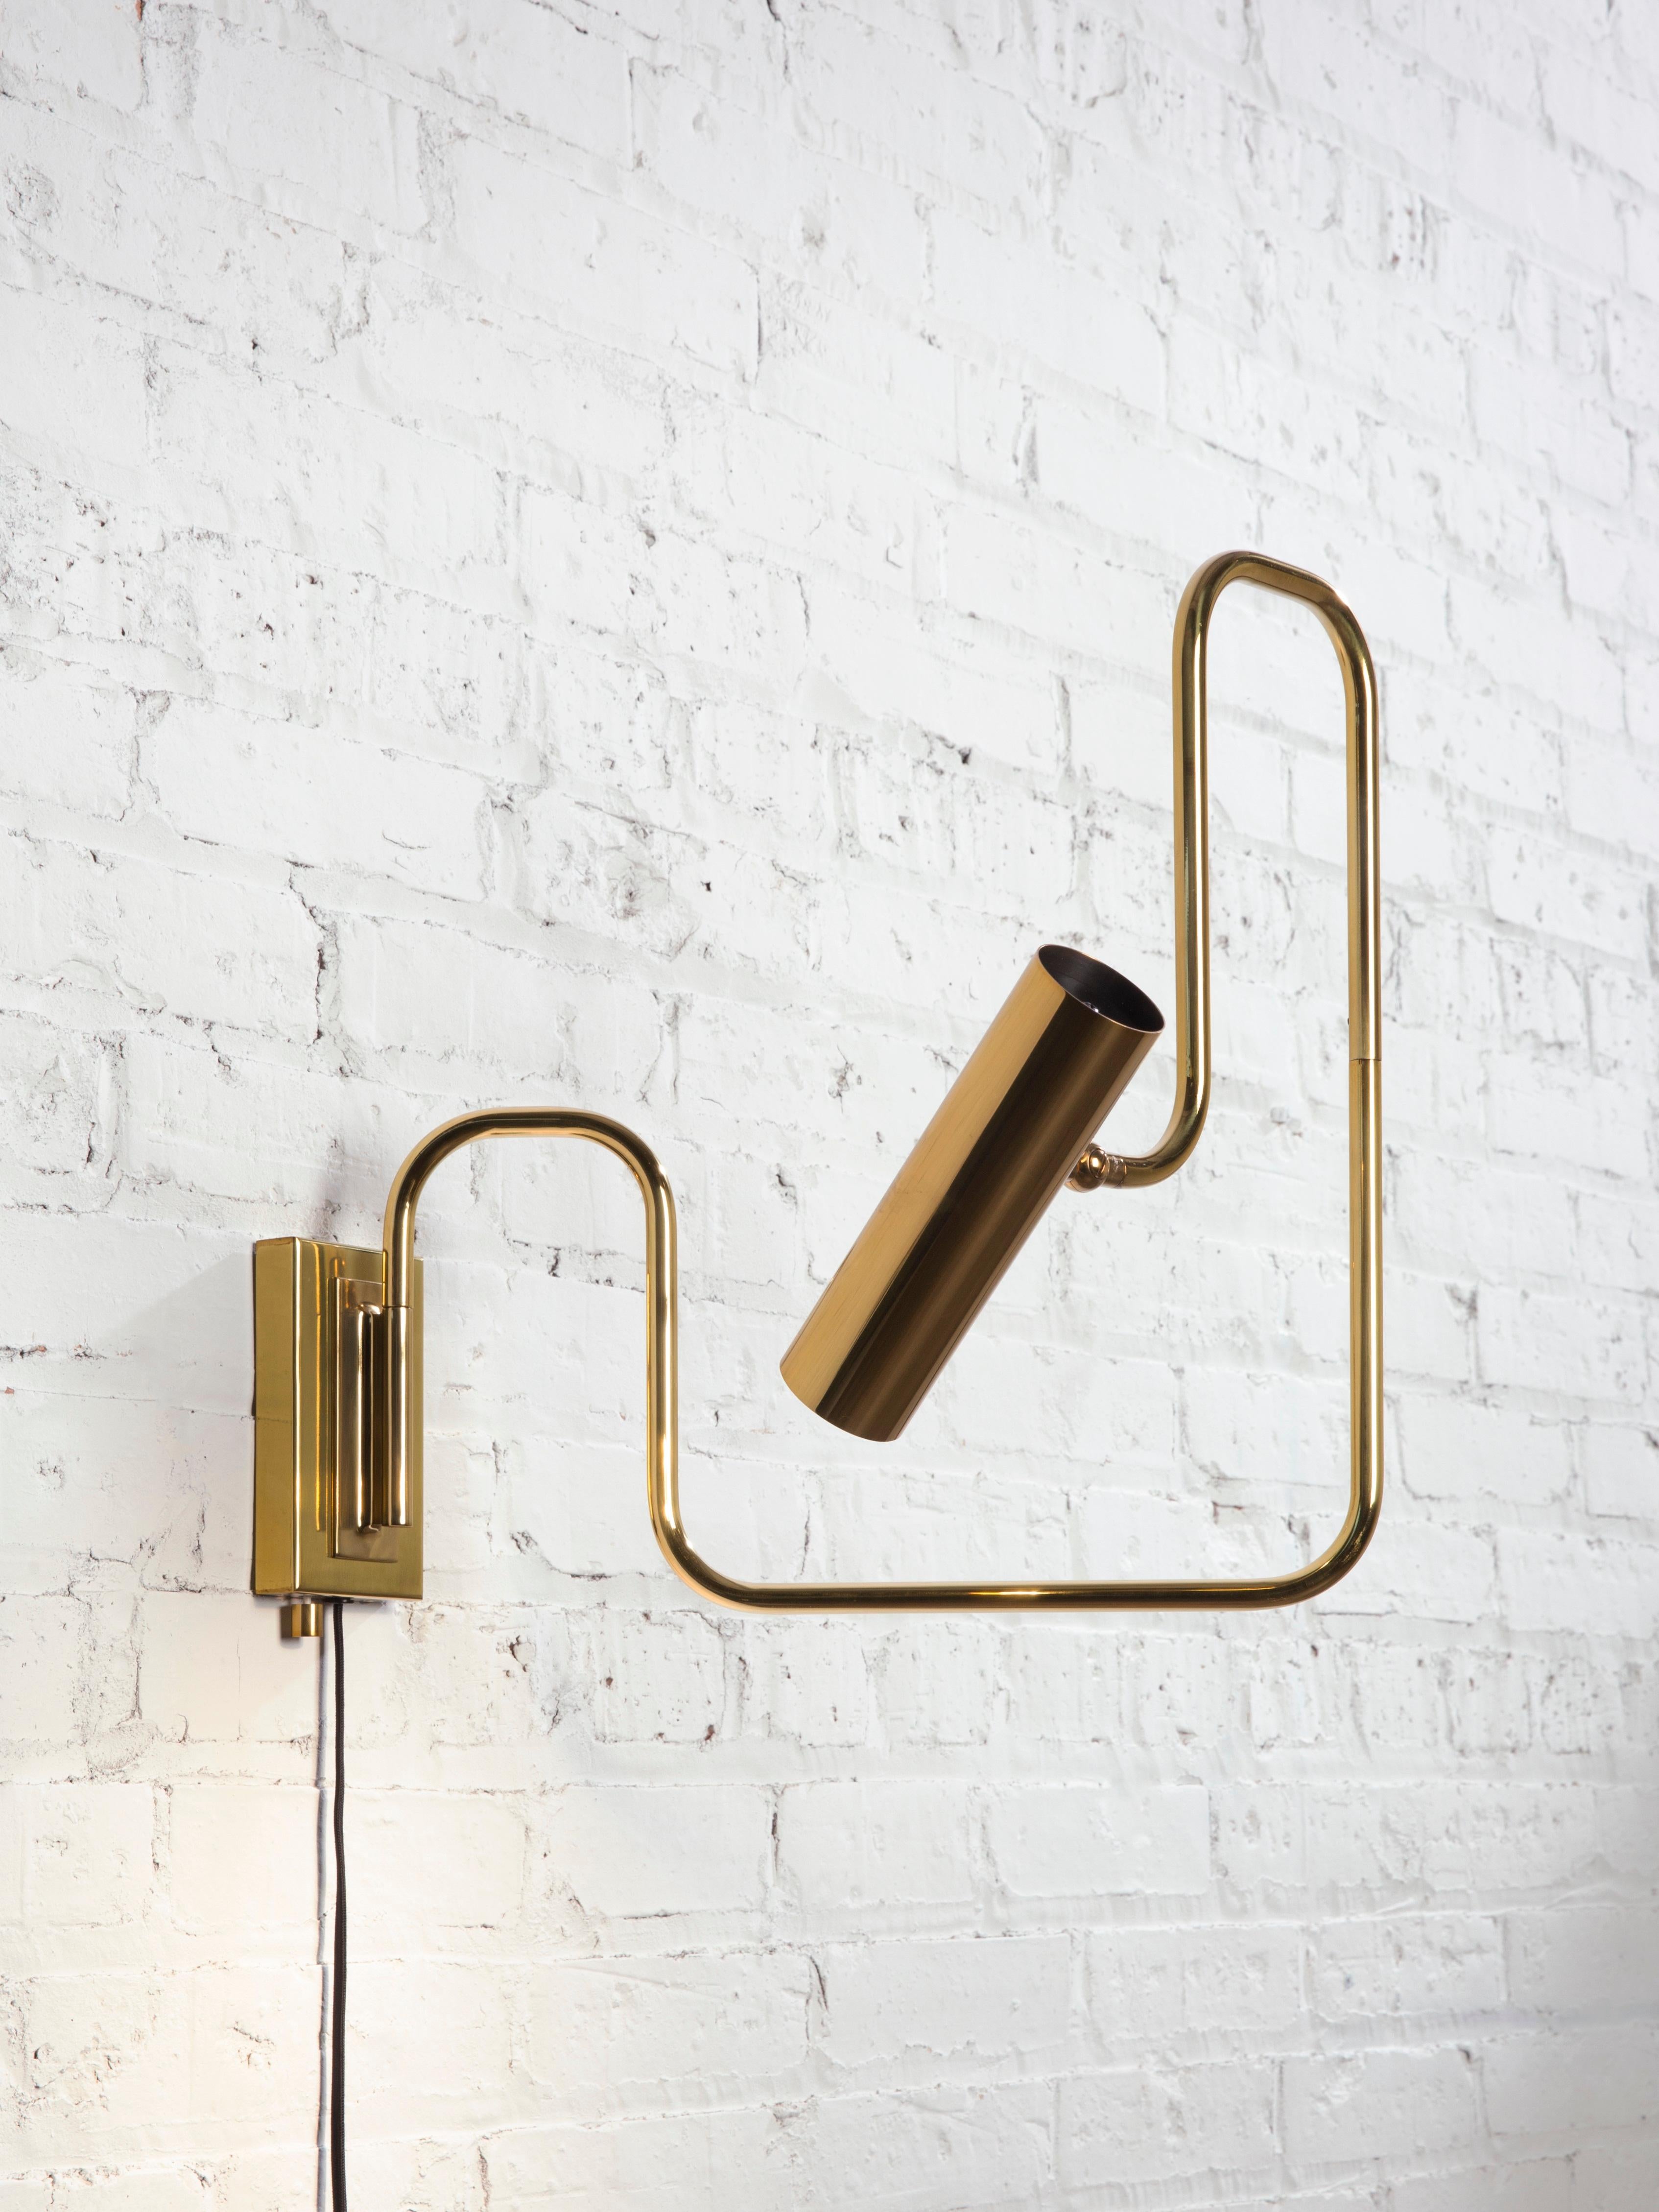 Pivot single wall lamp by Gentner Design.
Dimensions: D 40.6 x W 5 x H 39.3 cm.
Materials: polished tarnished brass.
Available in polished tarnished brass, darkened brass and hand rubbed brass.

All our lamps can be wired according to each country.